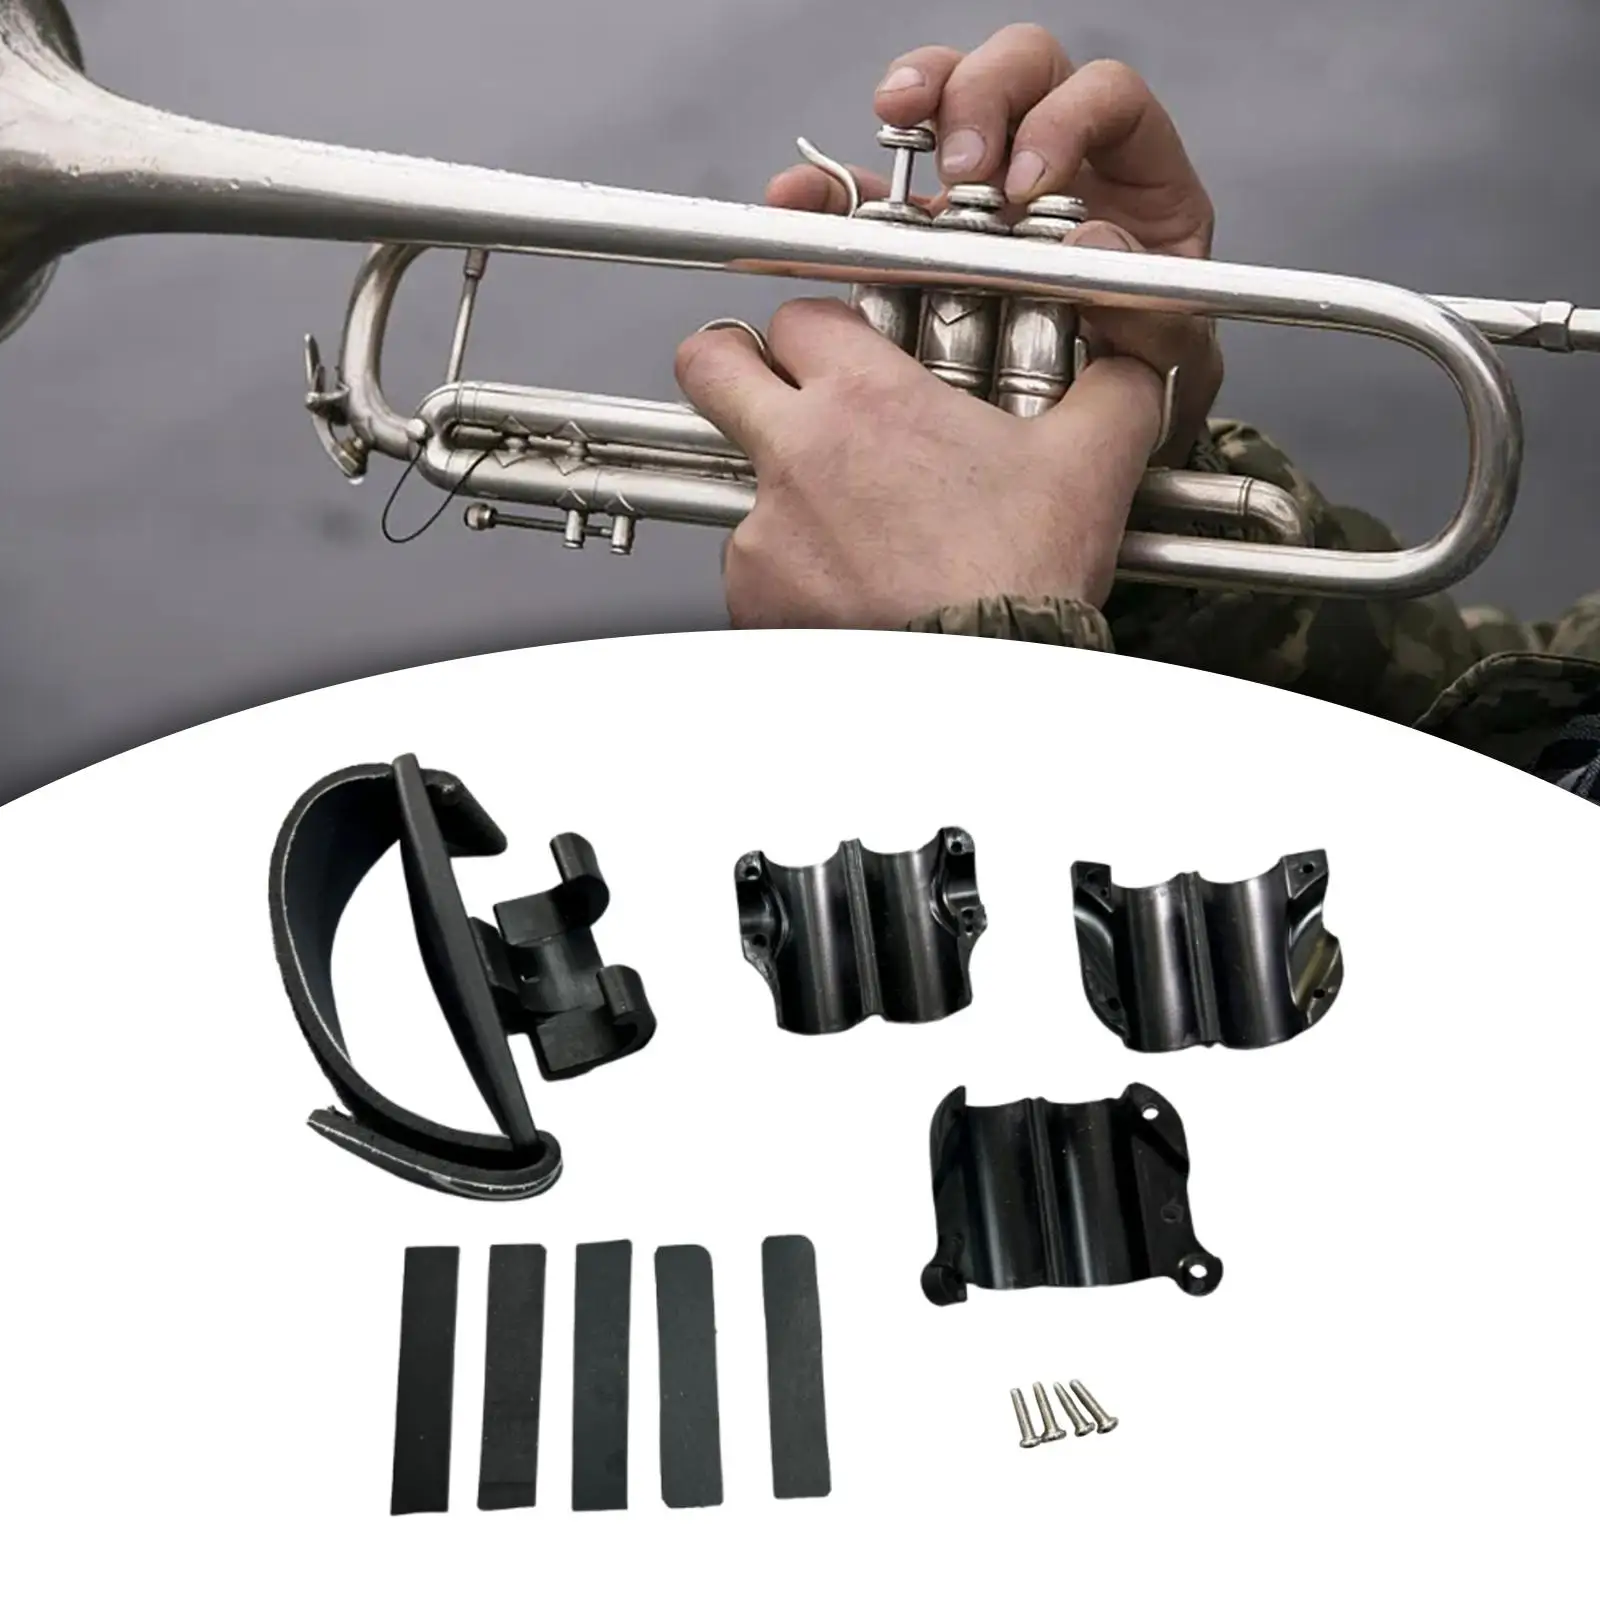 Trombone Grip Musician Gifts Attachments Cleaning Care Accessories